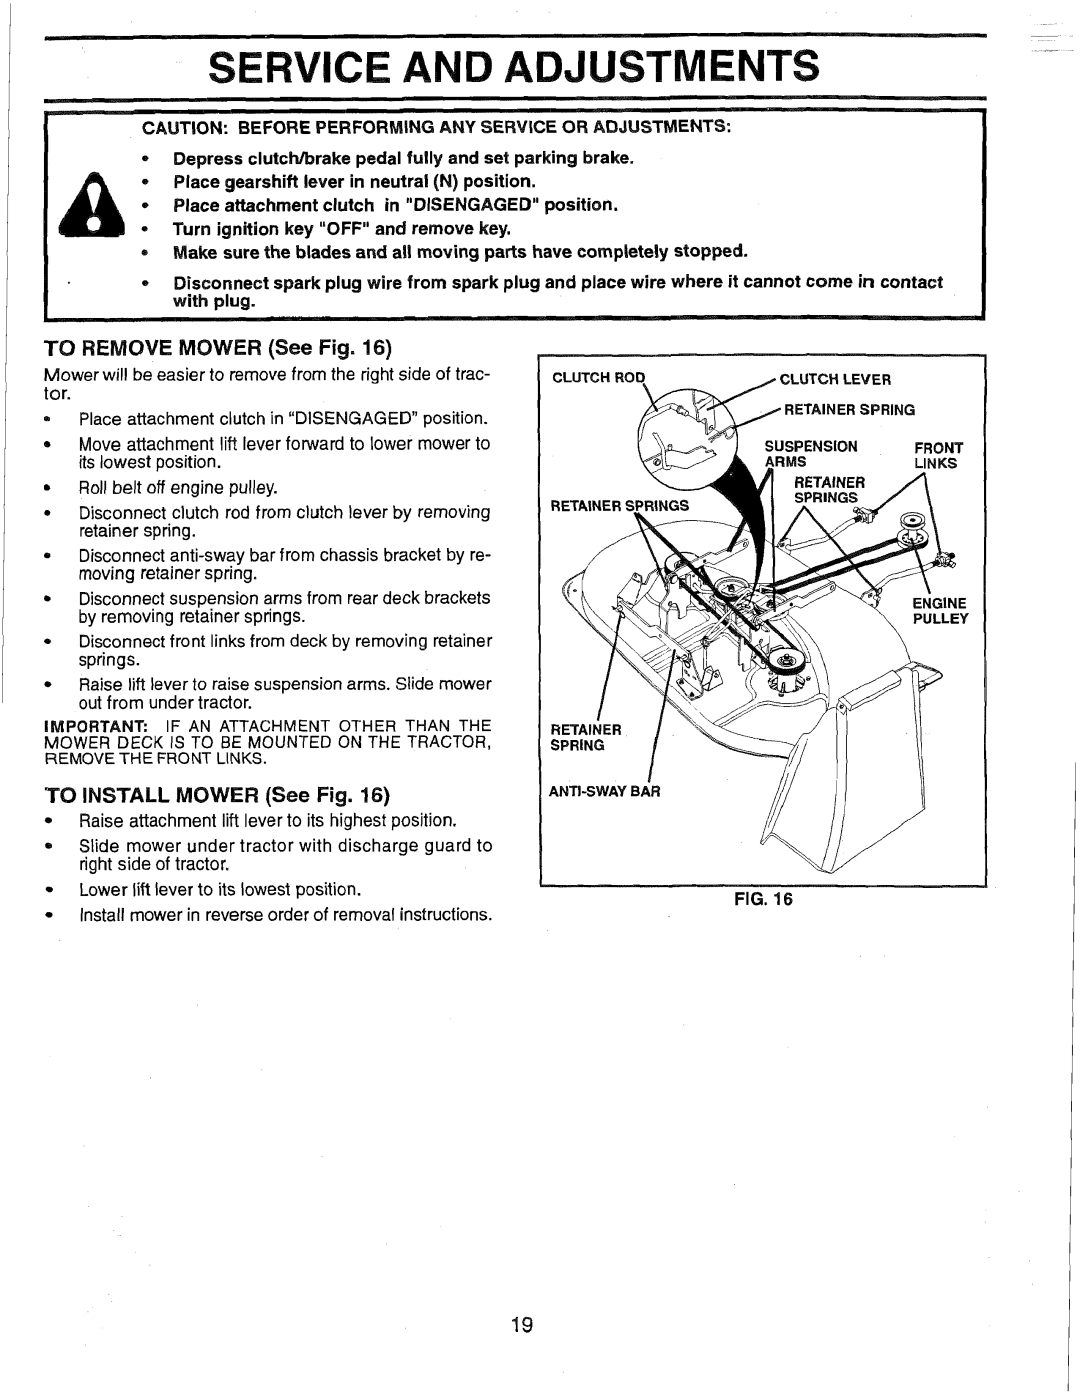 Weed Eater 165412, HD12538G manual TO REMOVE MOWER See Fig, TO INSTALL MOWER See Fig, Service And Adjustments 